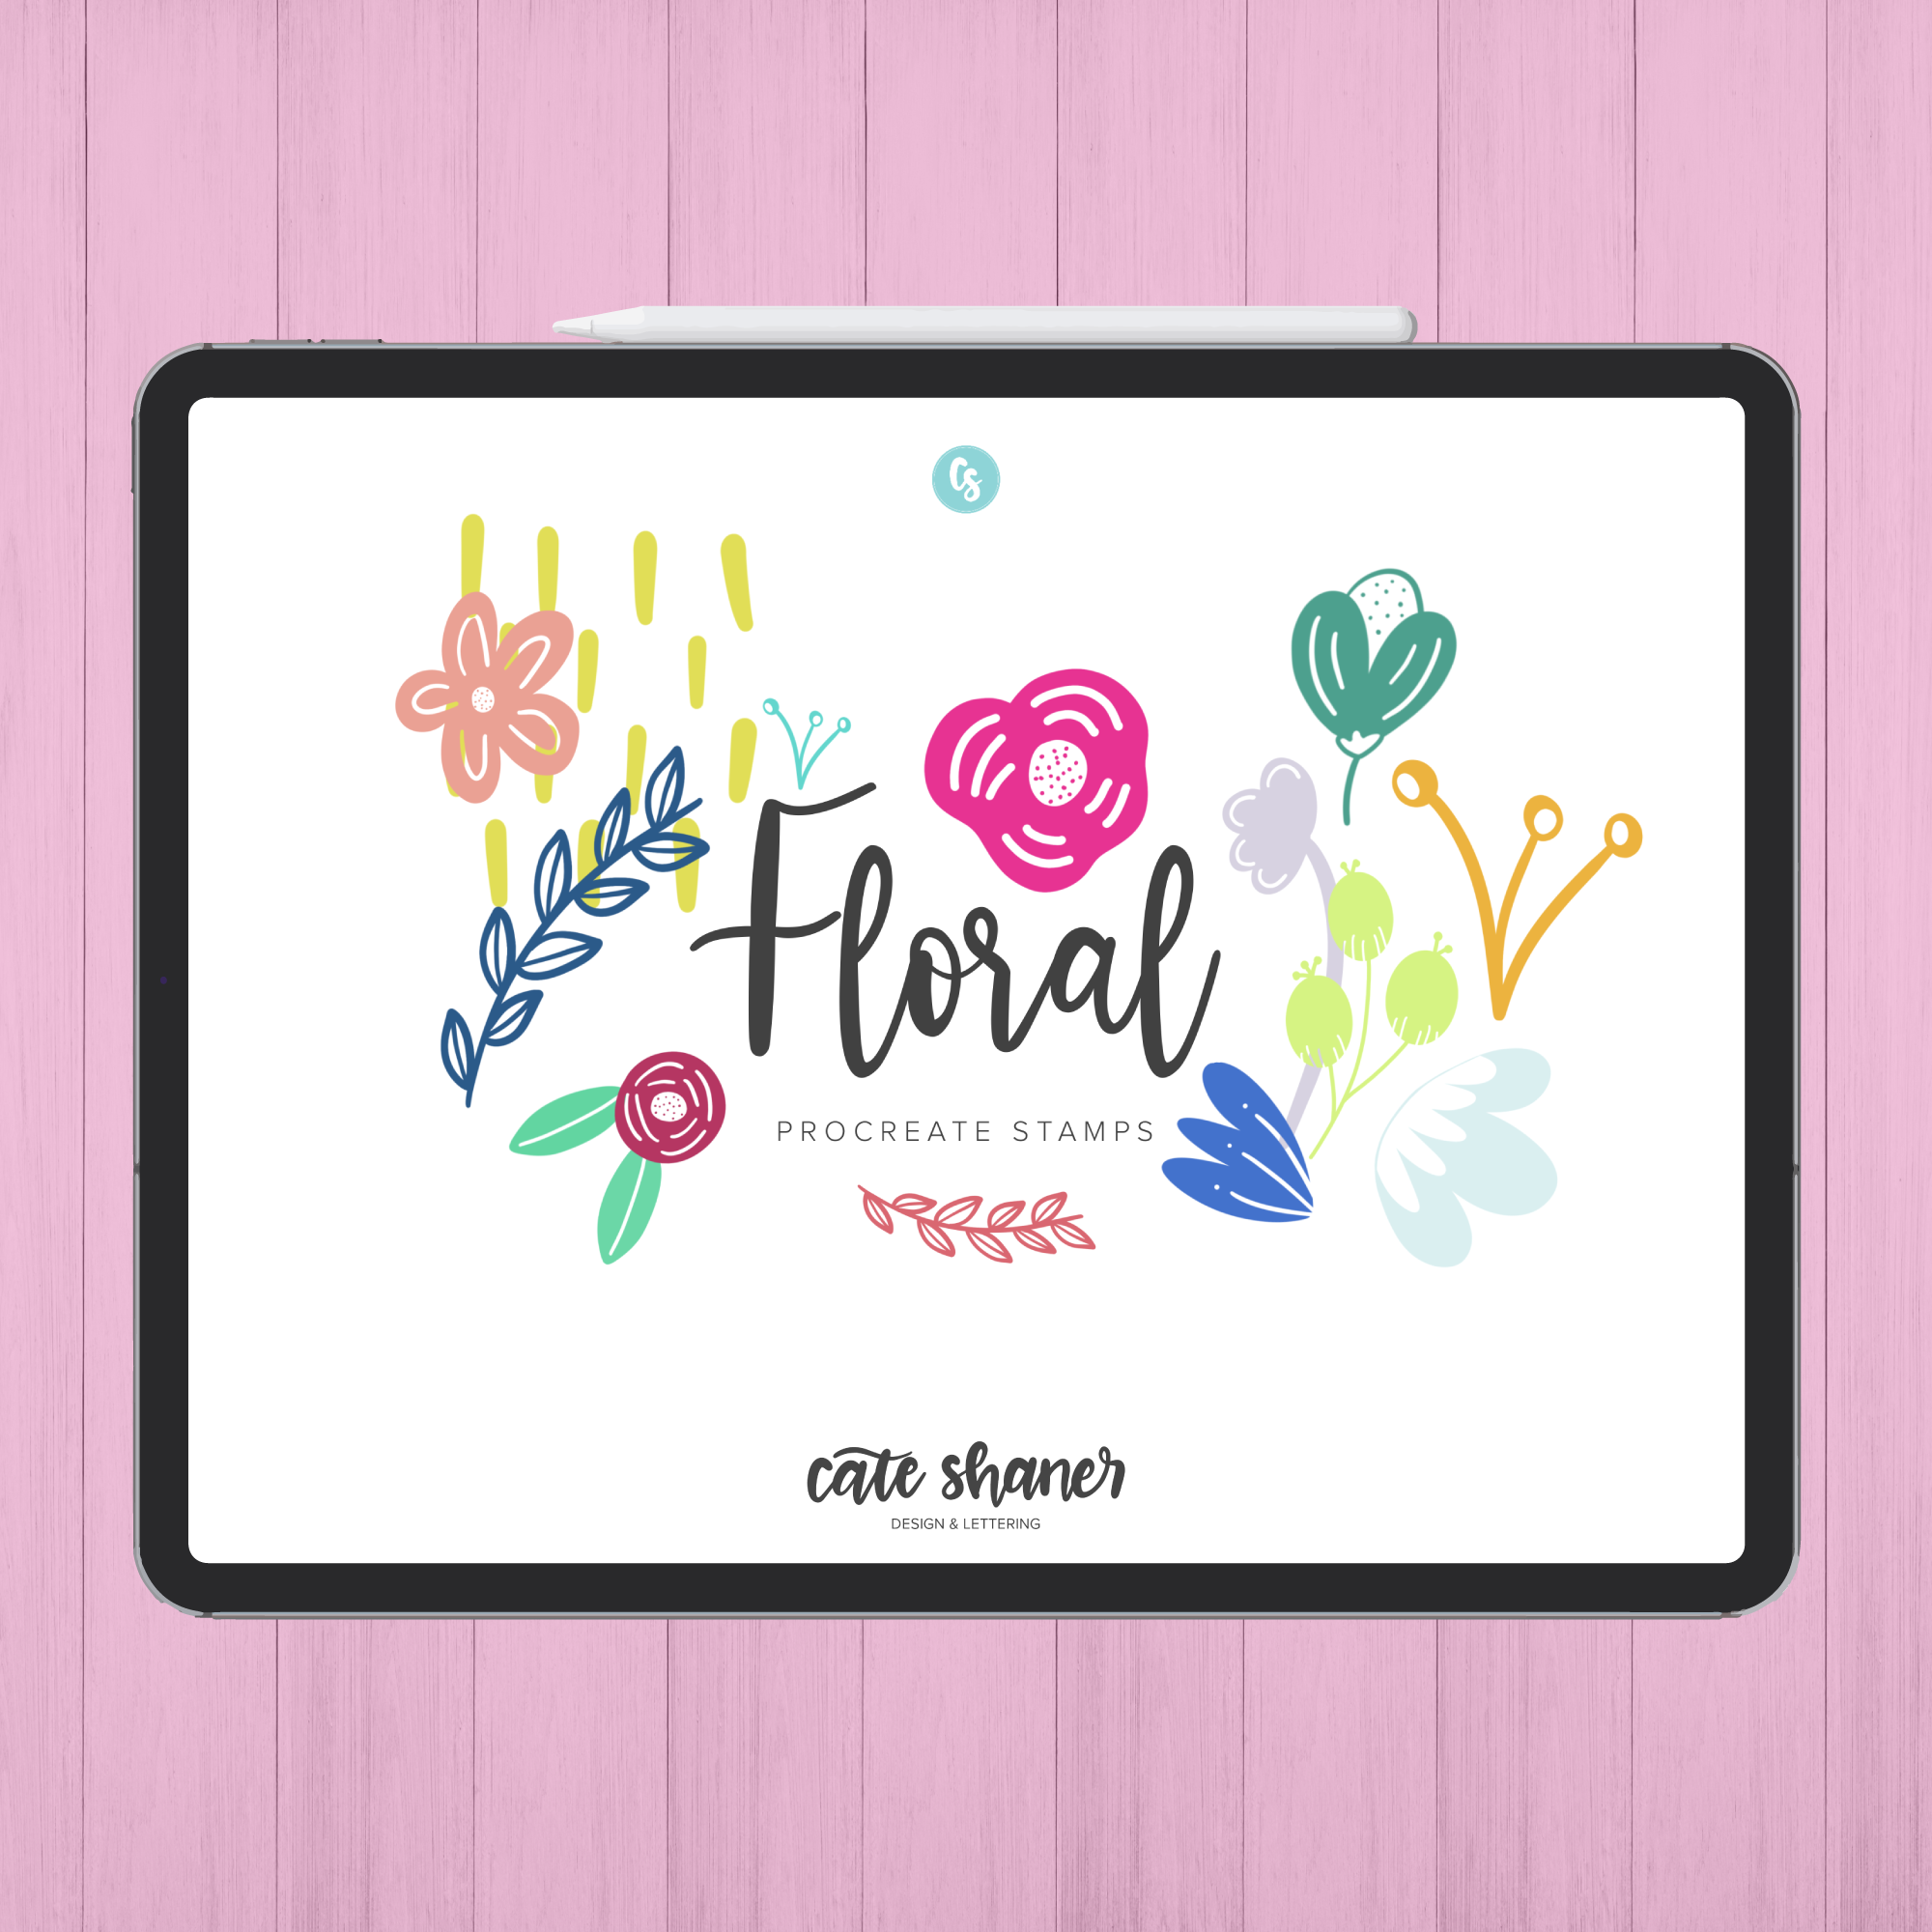 Floral Procreate Stamps